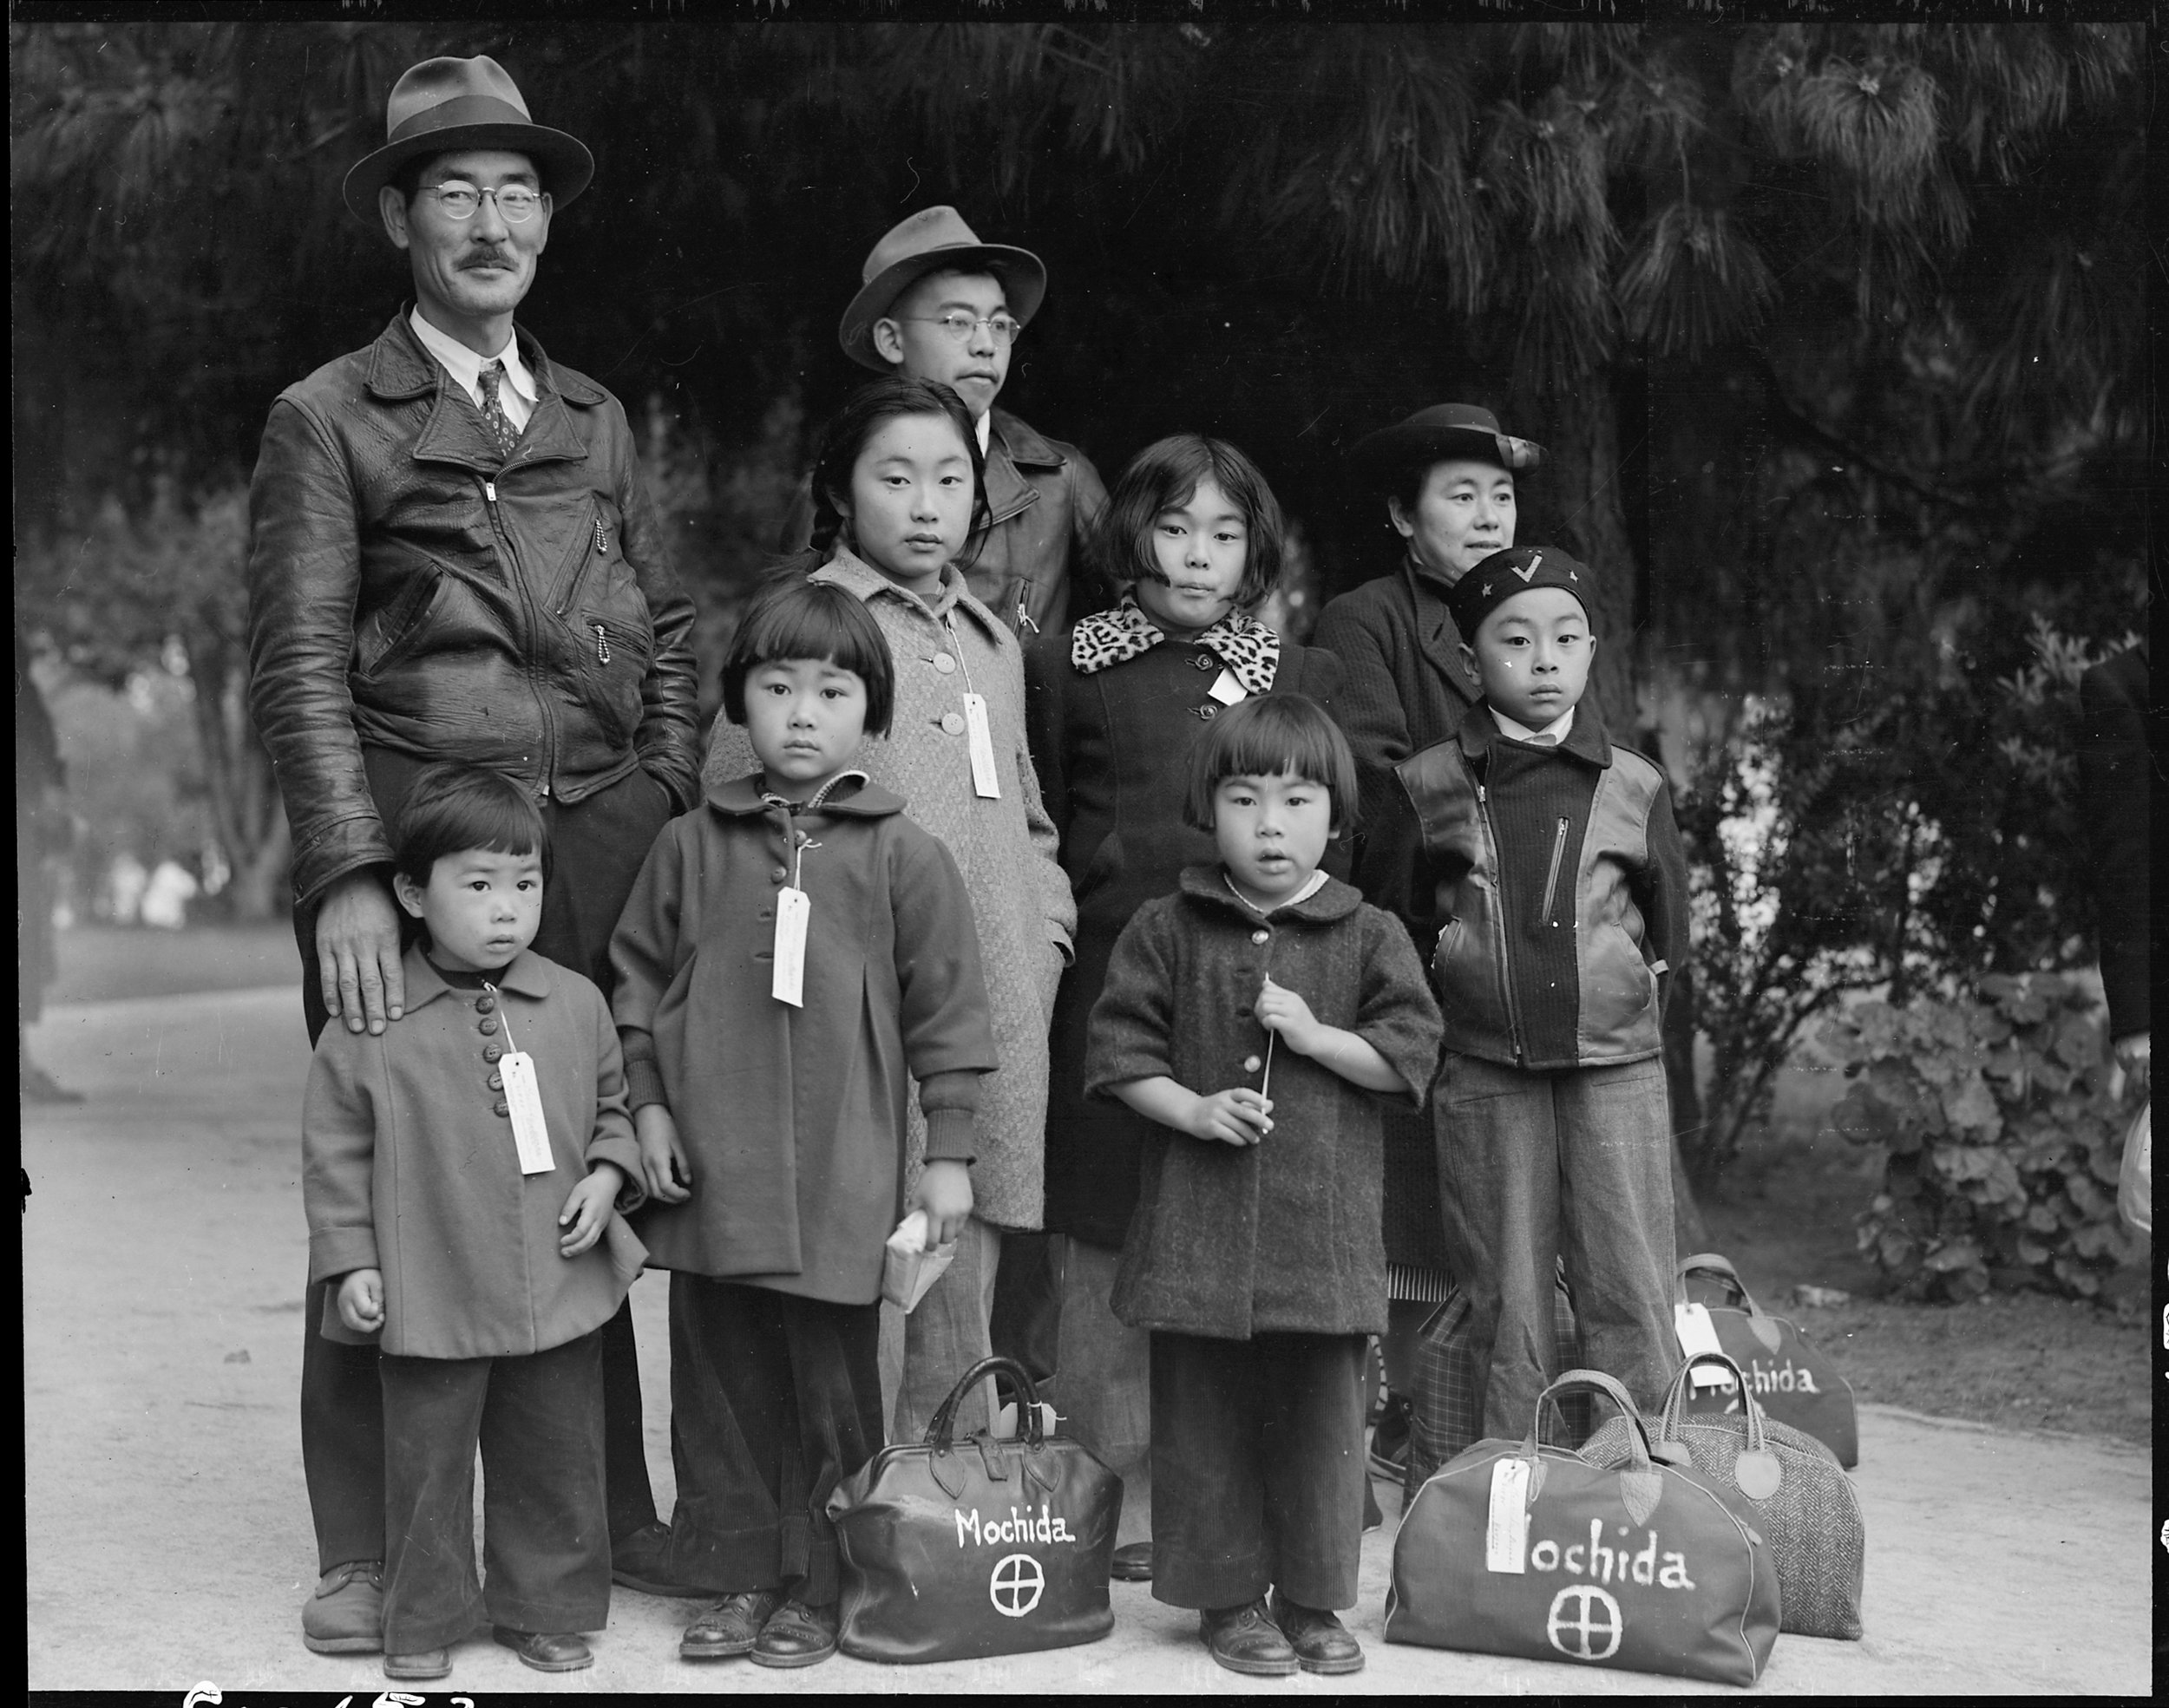 May 8, 1942 — Hayward, California. Members of the Mochida family awaiting evacuation bus. Identification tags are used to aid in keeping the family unit intact during all phases of evacuation. Mochida operated a nursery and five greenhouses on a two-acre site in Eden Township. He raised snapdragons and sweet peas. Evacuees of Japanese ancestry will be housed in War Relocation Authority centers for the duration.